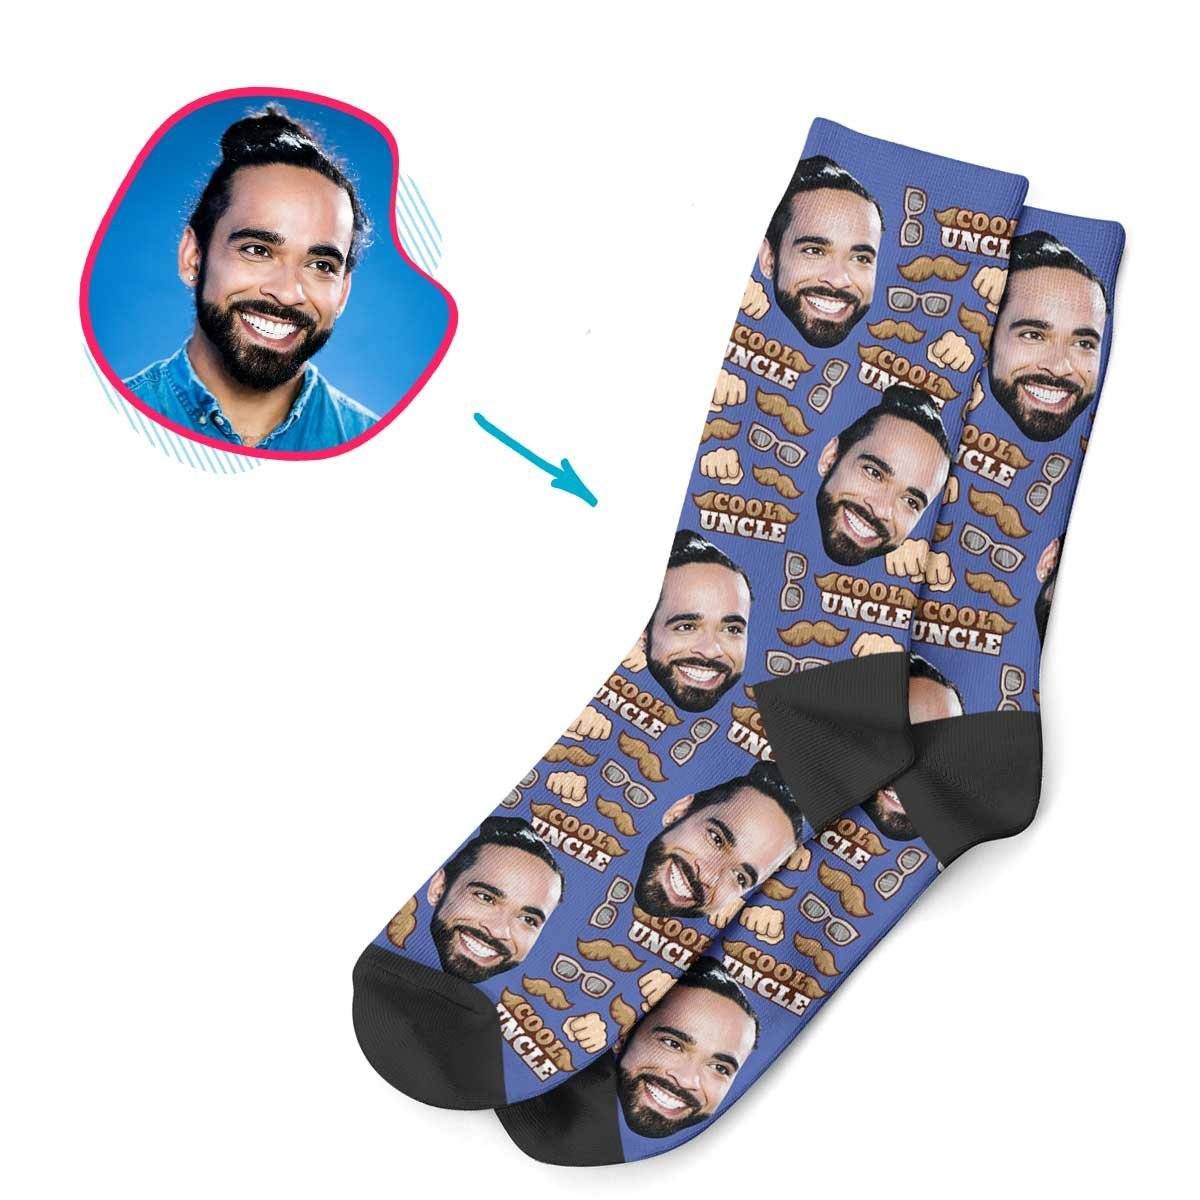 Darkblue Uncle personalized socks with photo of face printed on them